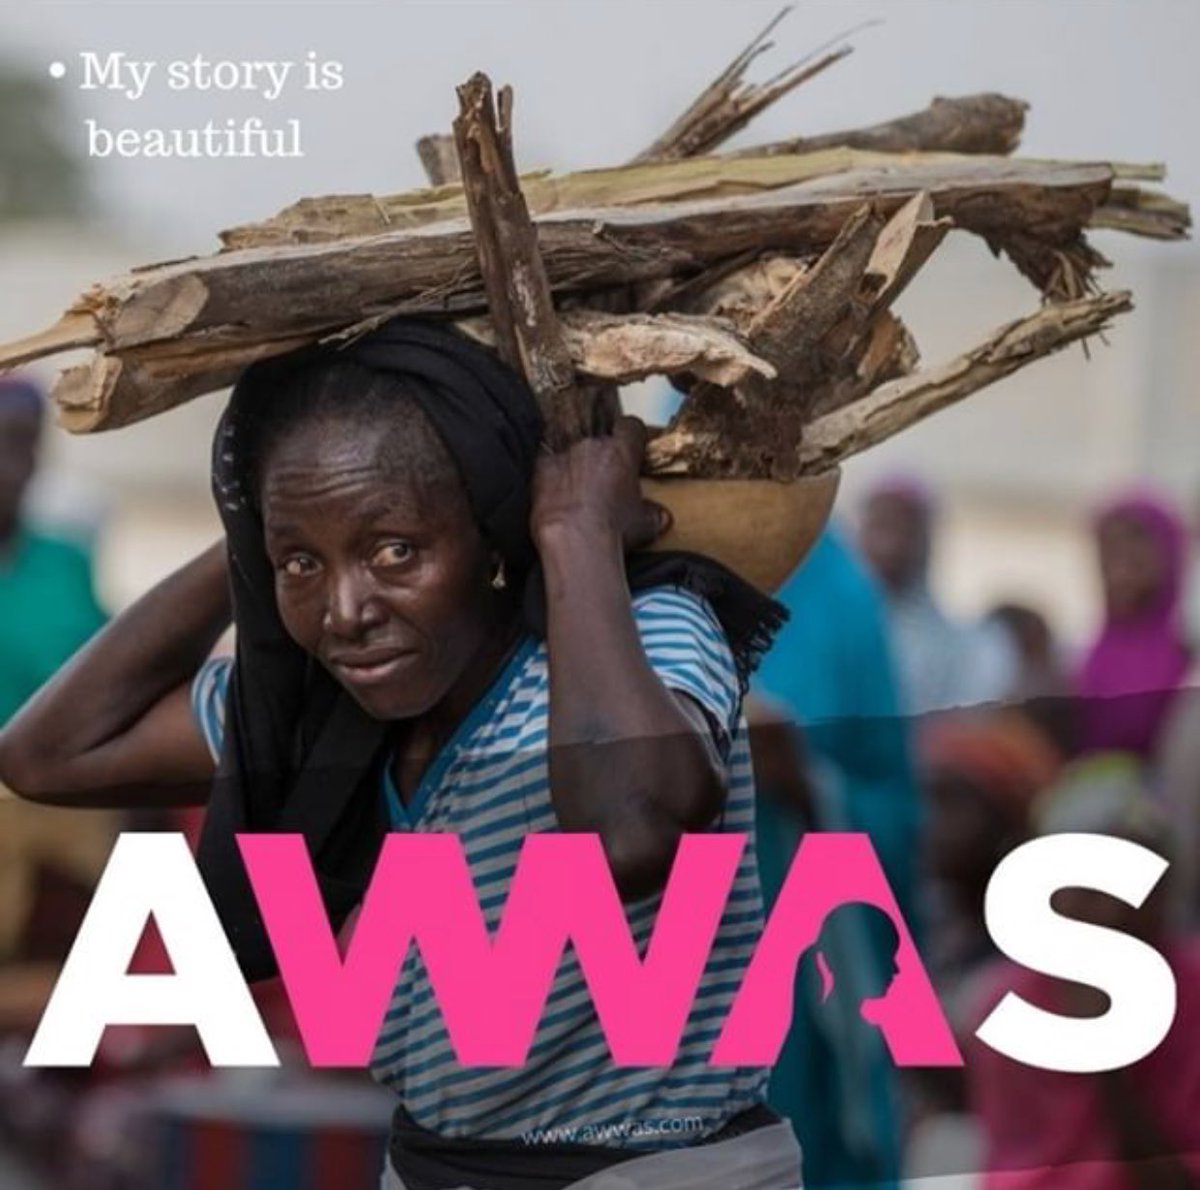 Tomorrow in Abuja, #AWWAS Photo Exhibition in changing the narrative of young victimized women through photography. #AWomanWithAStory